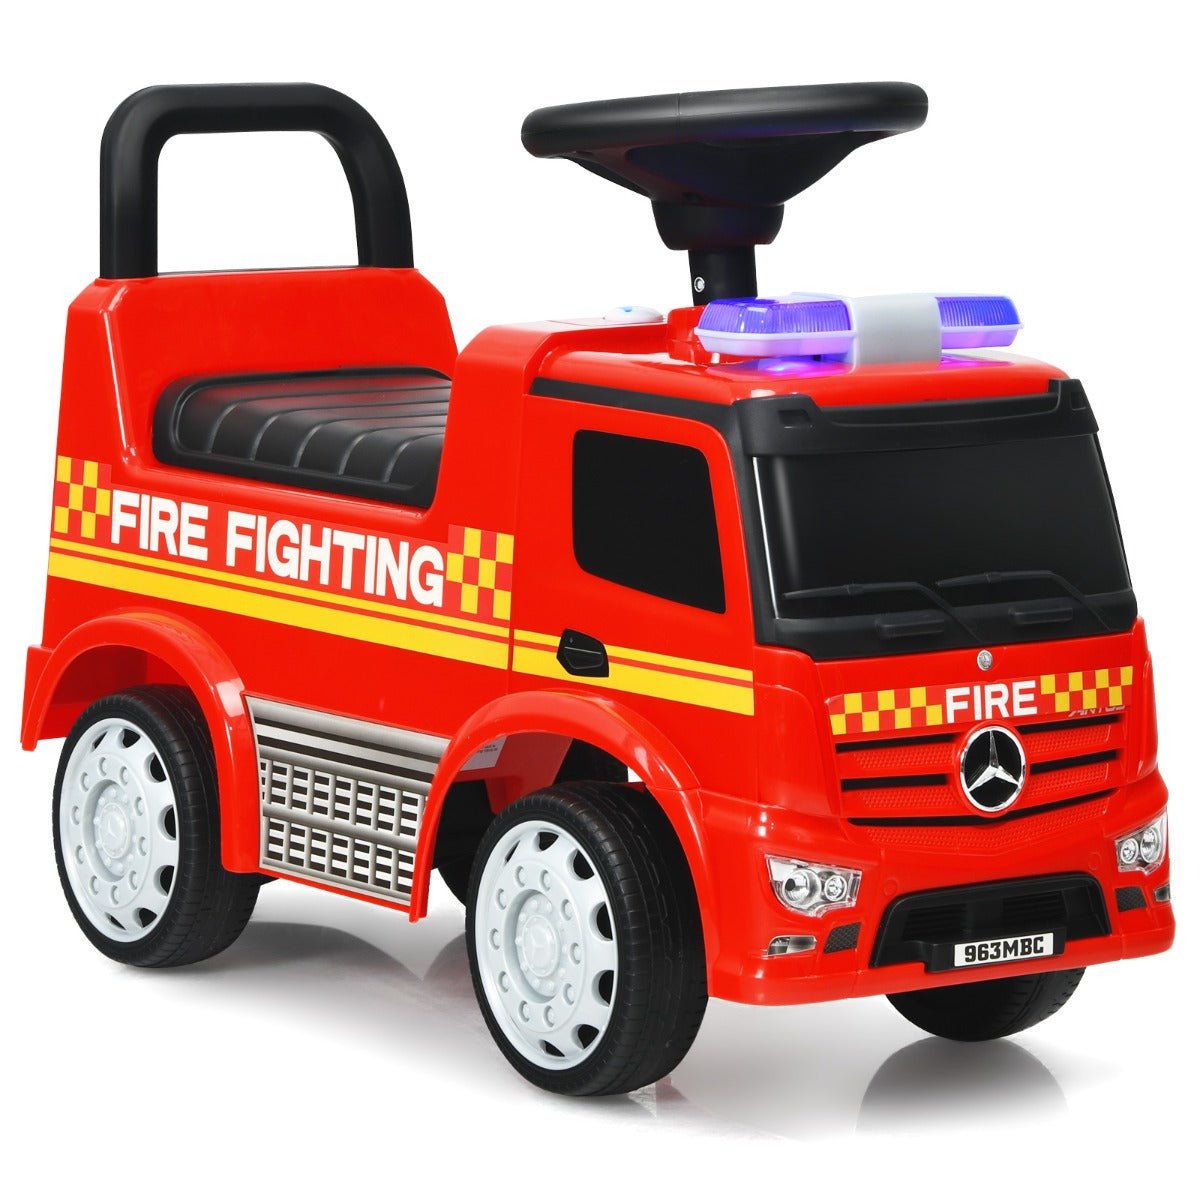 Storage-Packed Ride: Licensed Mercedes Benz Kids Ride On Car for Toddlers